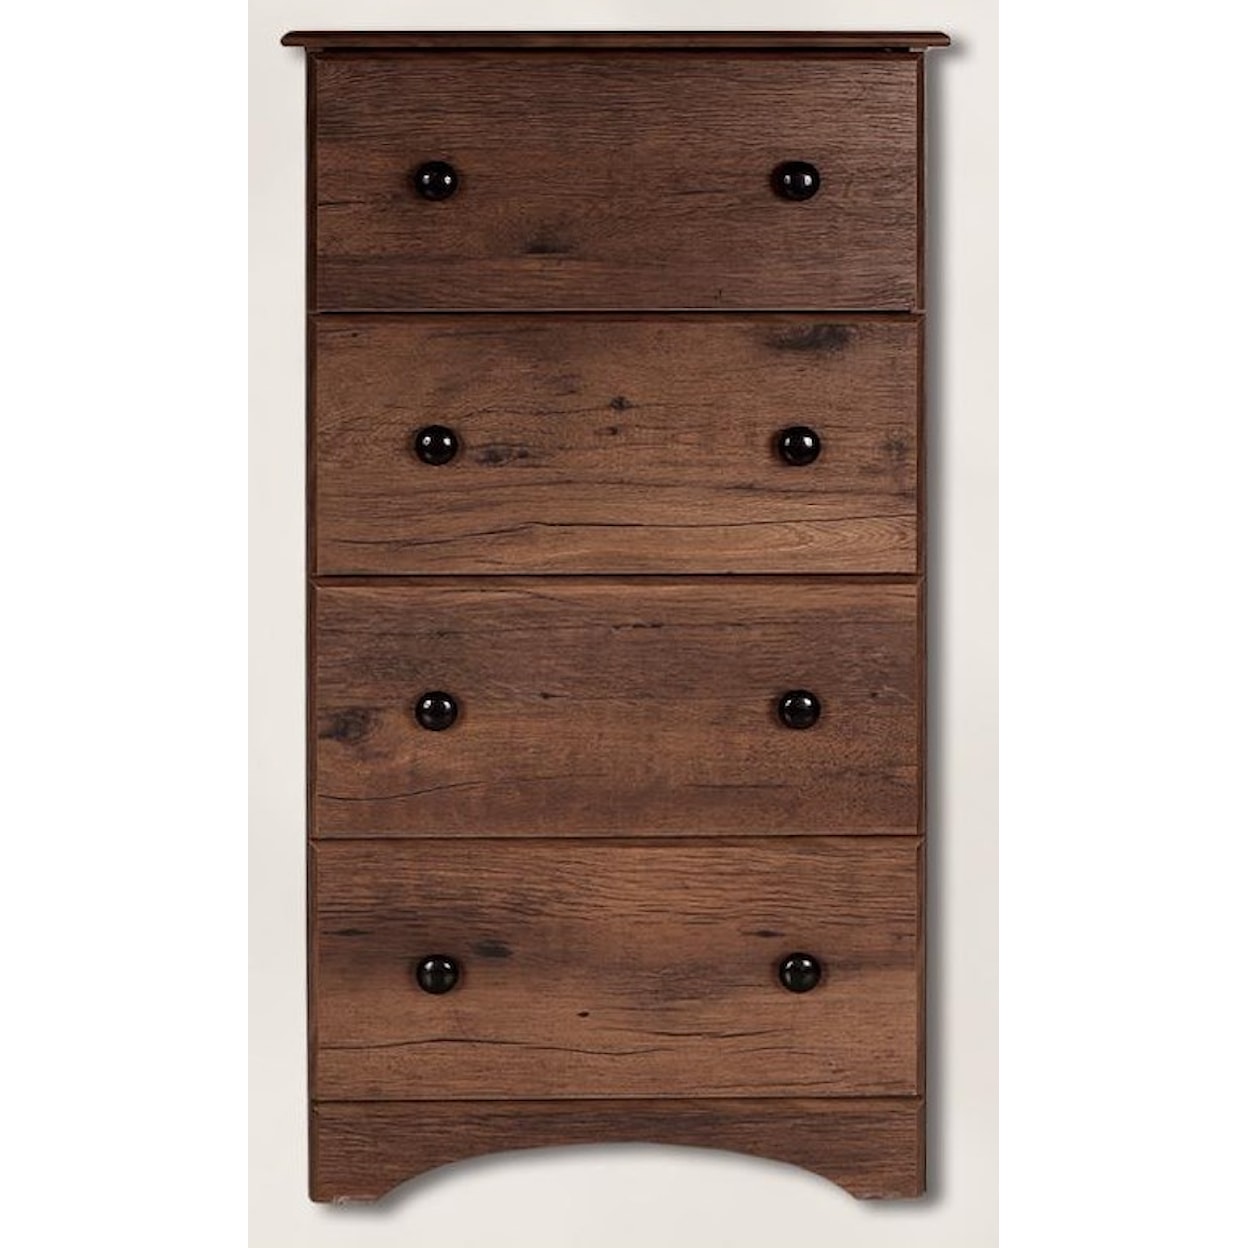 Perdue 15000 4 Drawer Chest